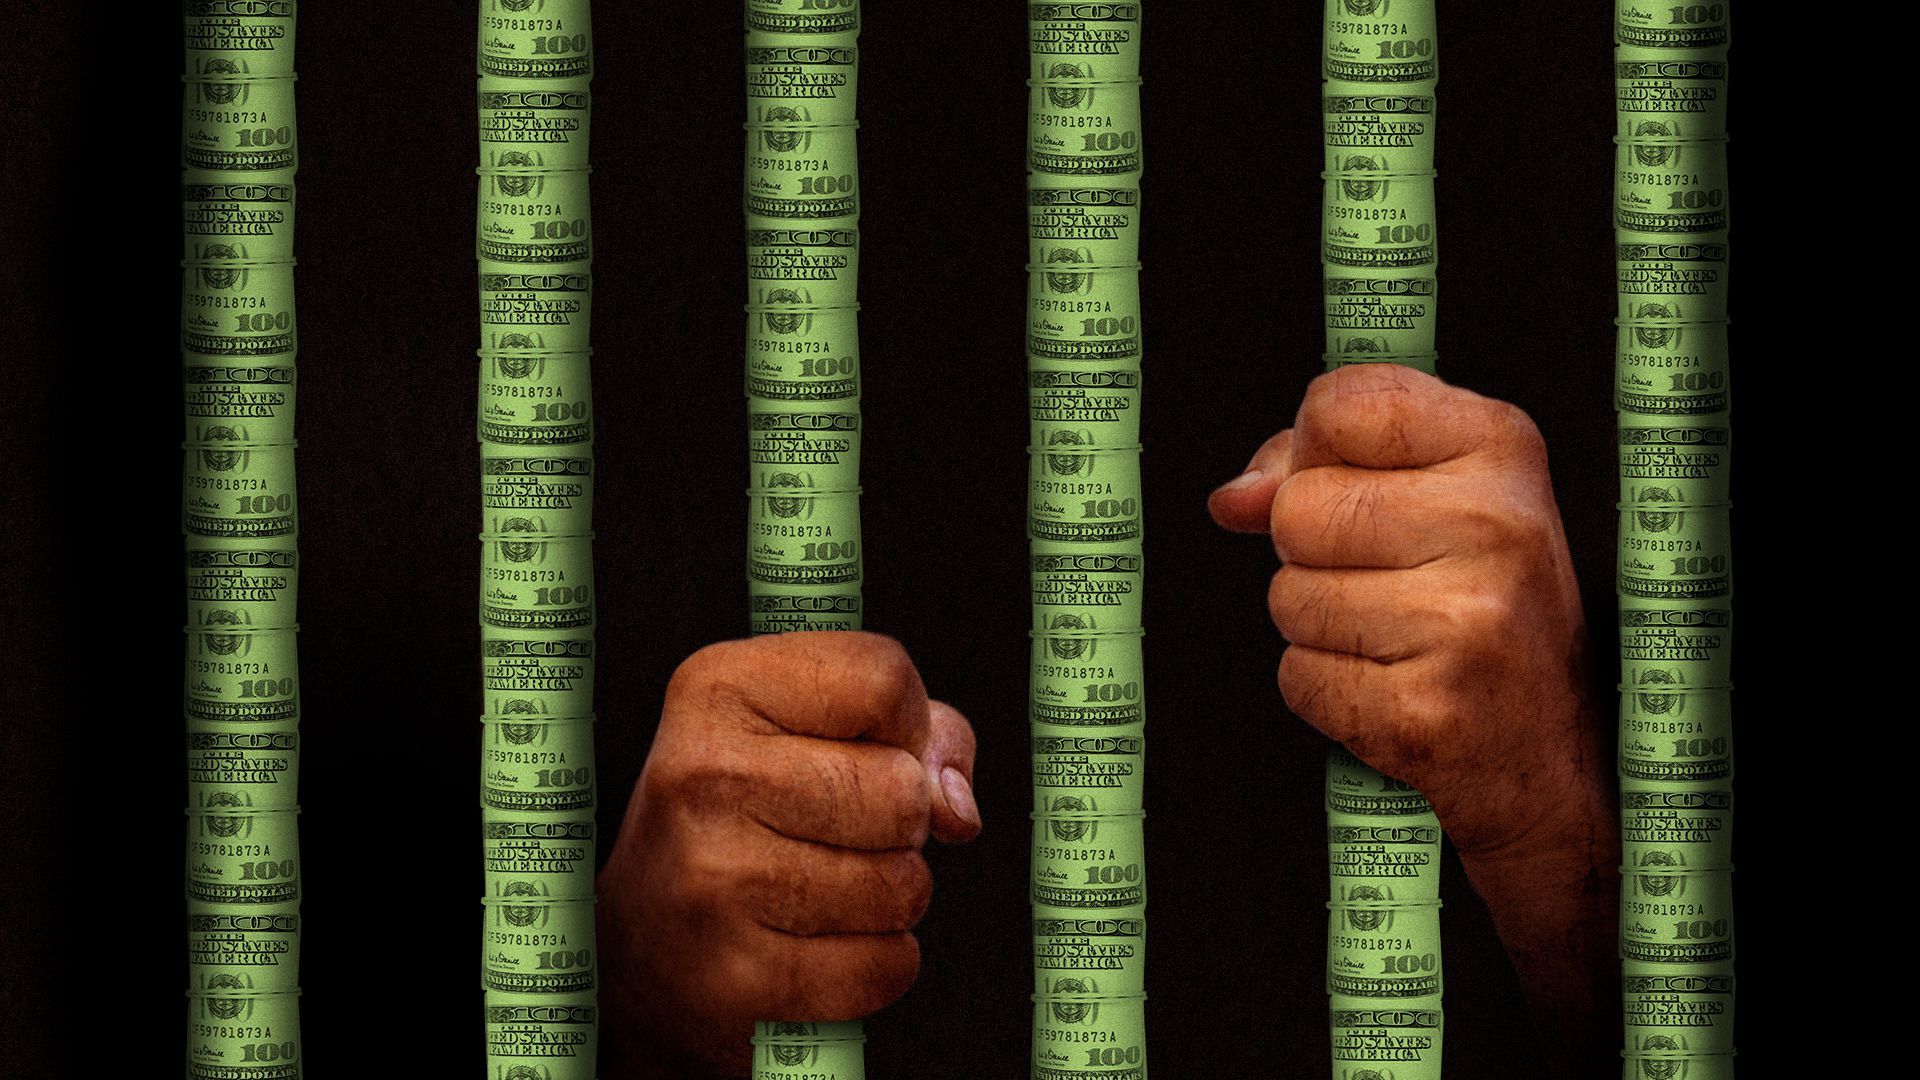 Illustration of hands behind bars made up of stacked rolls of money.  